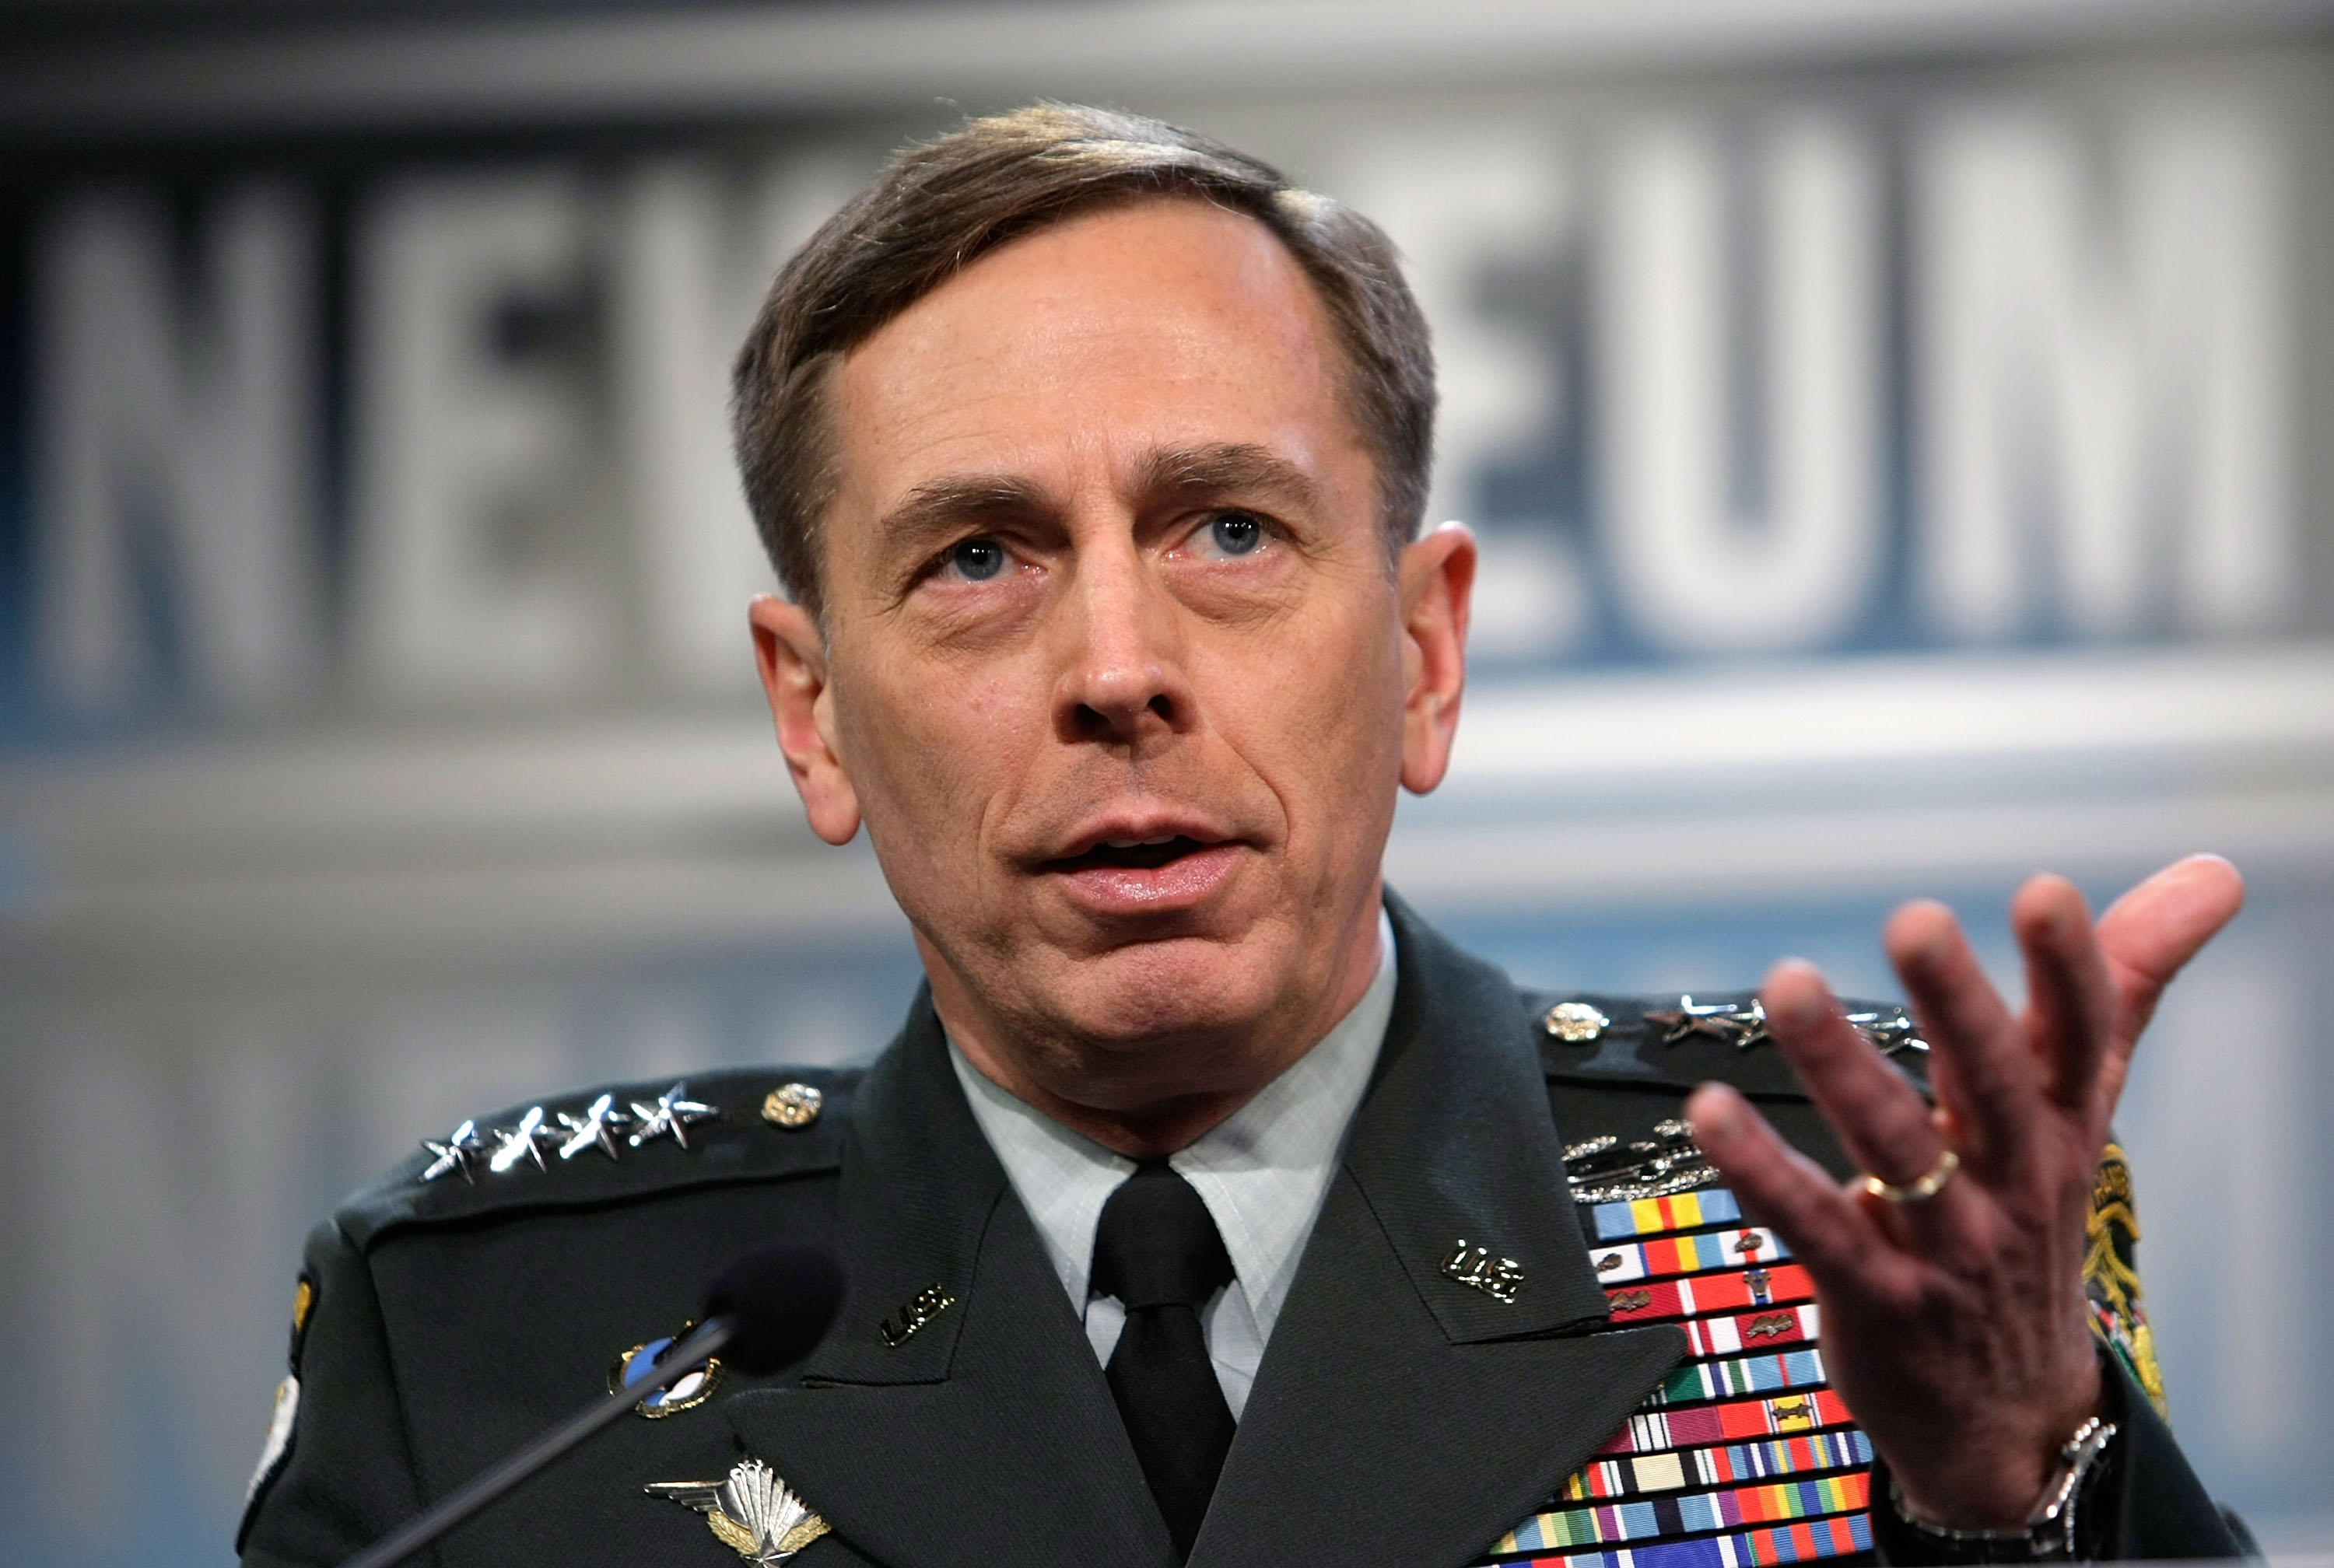 U.S. Army General David H. Petraeus, the commander of Multi-National Force - Iraq, briefs reporters on his view of the military situation in Iraq, Washington, D.C., April 10, 2008.